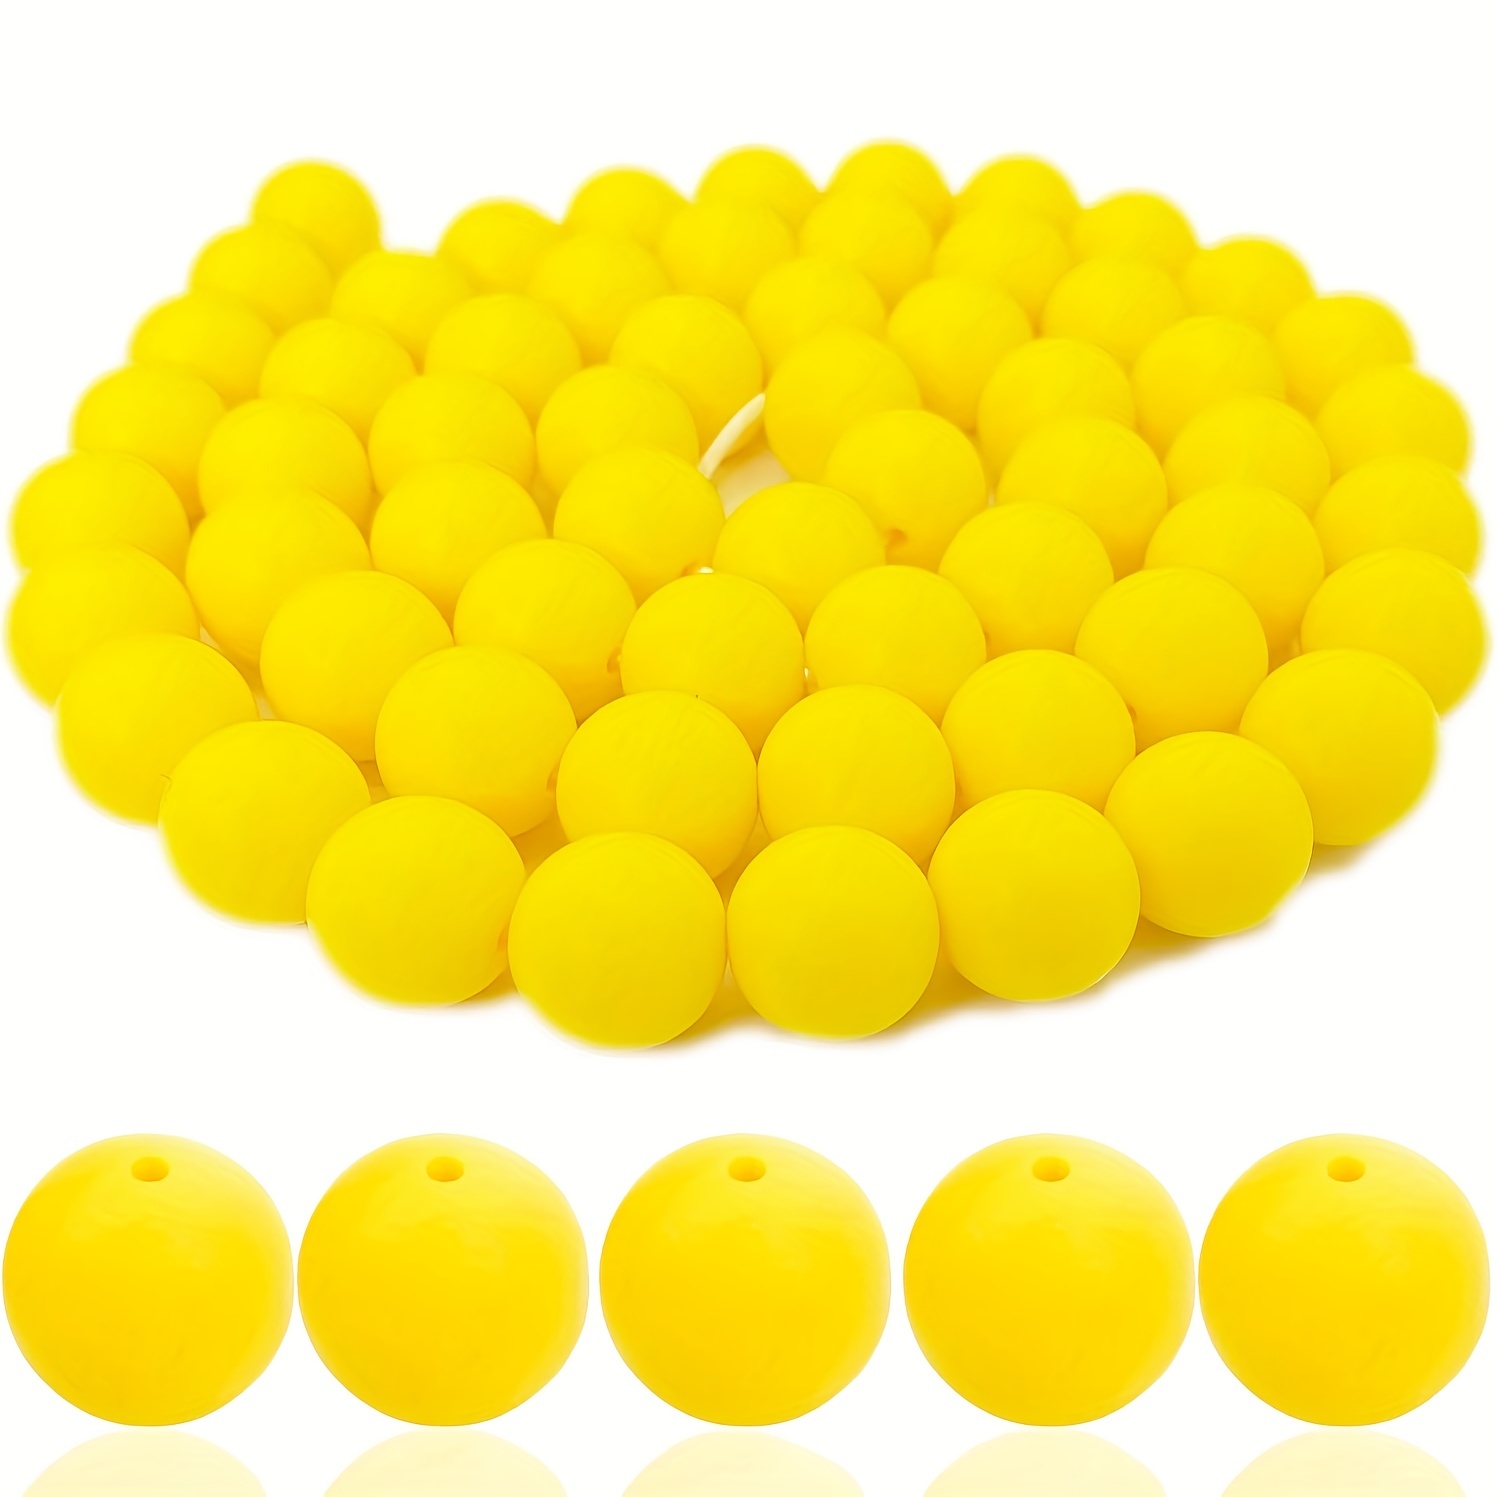 60 PCS Round Silicone Focal Beads Bulk Rubber Beads Silicone Beads Necklace